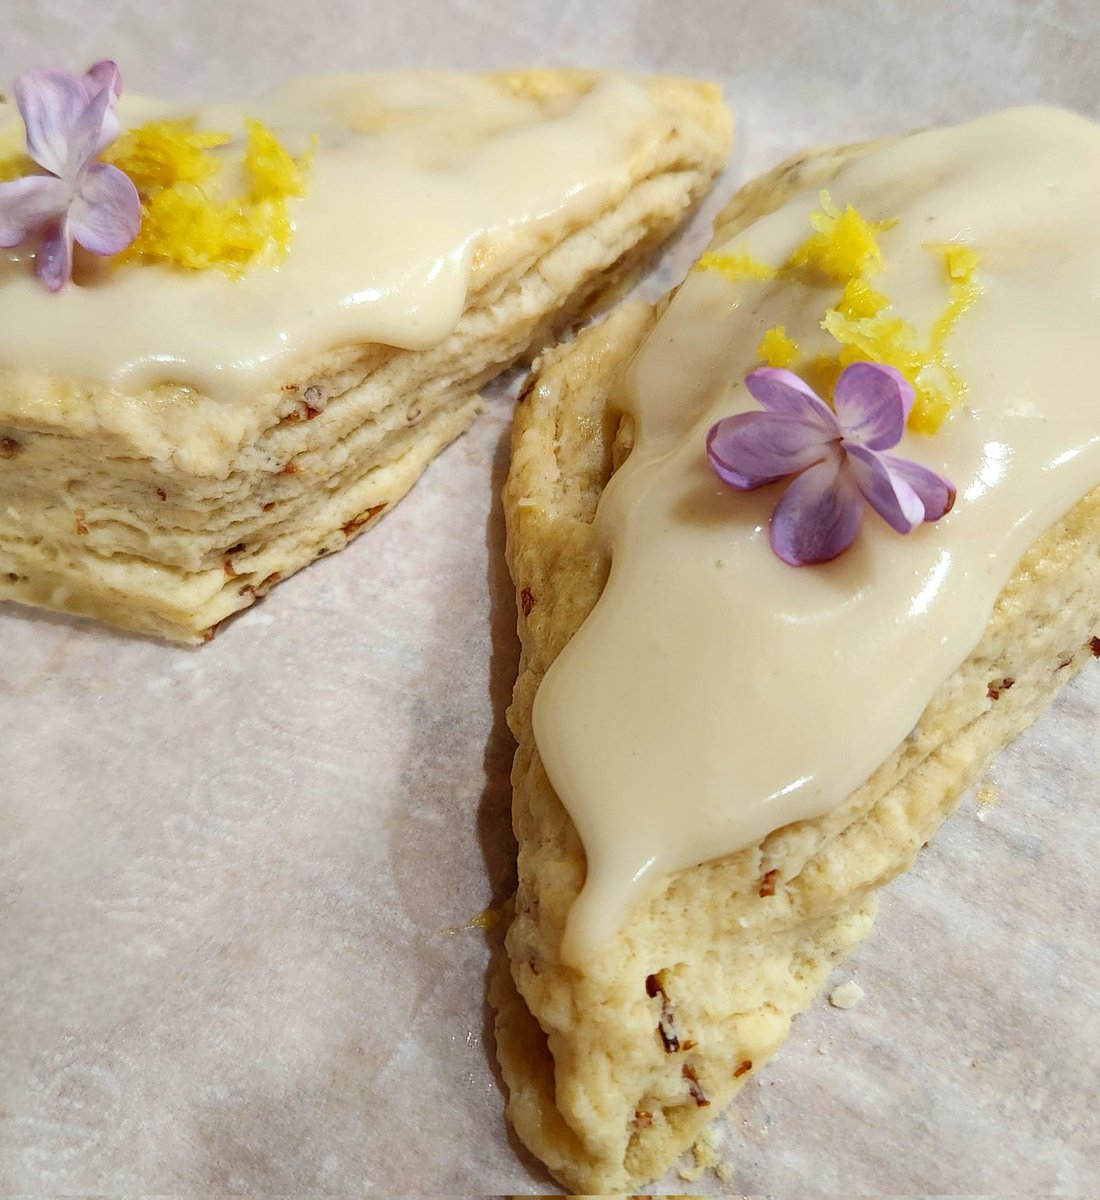 Good morning Tweeps (it's 11:56 here😜) Been a bit busy, making lilac scones with a lemon, cream cheese glaze this morning. *chef's kiss Have a great hump day y'all 😘